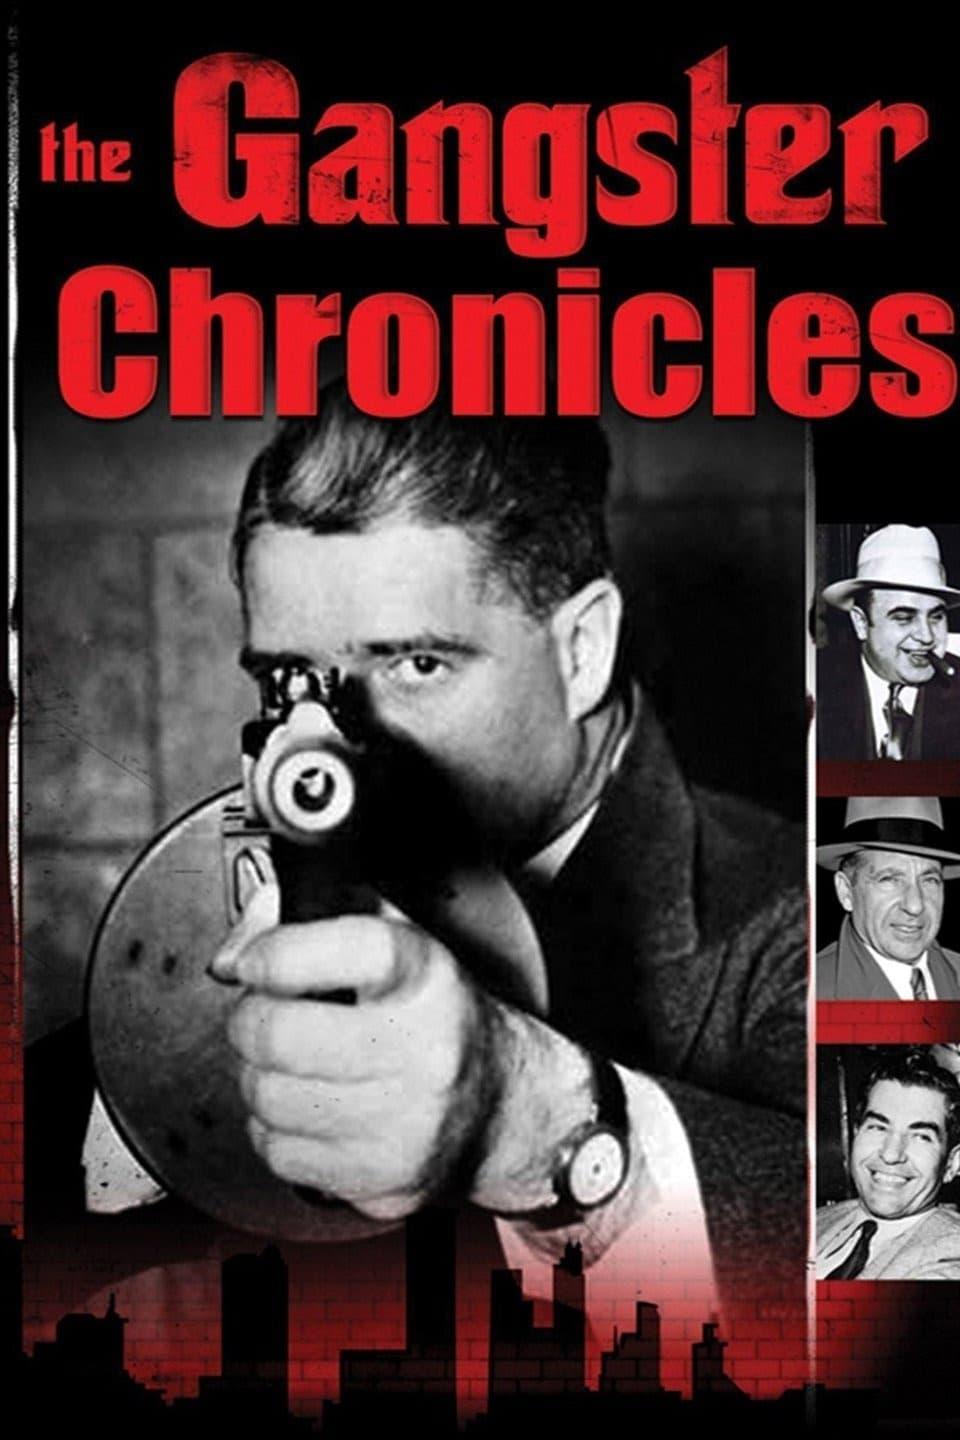 The Gangster Chronicles poster